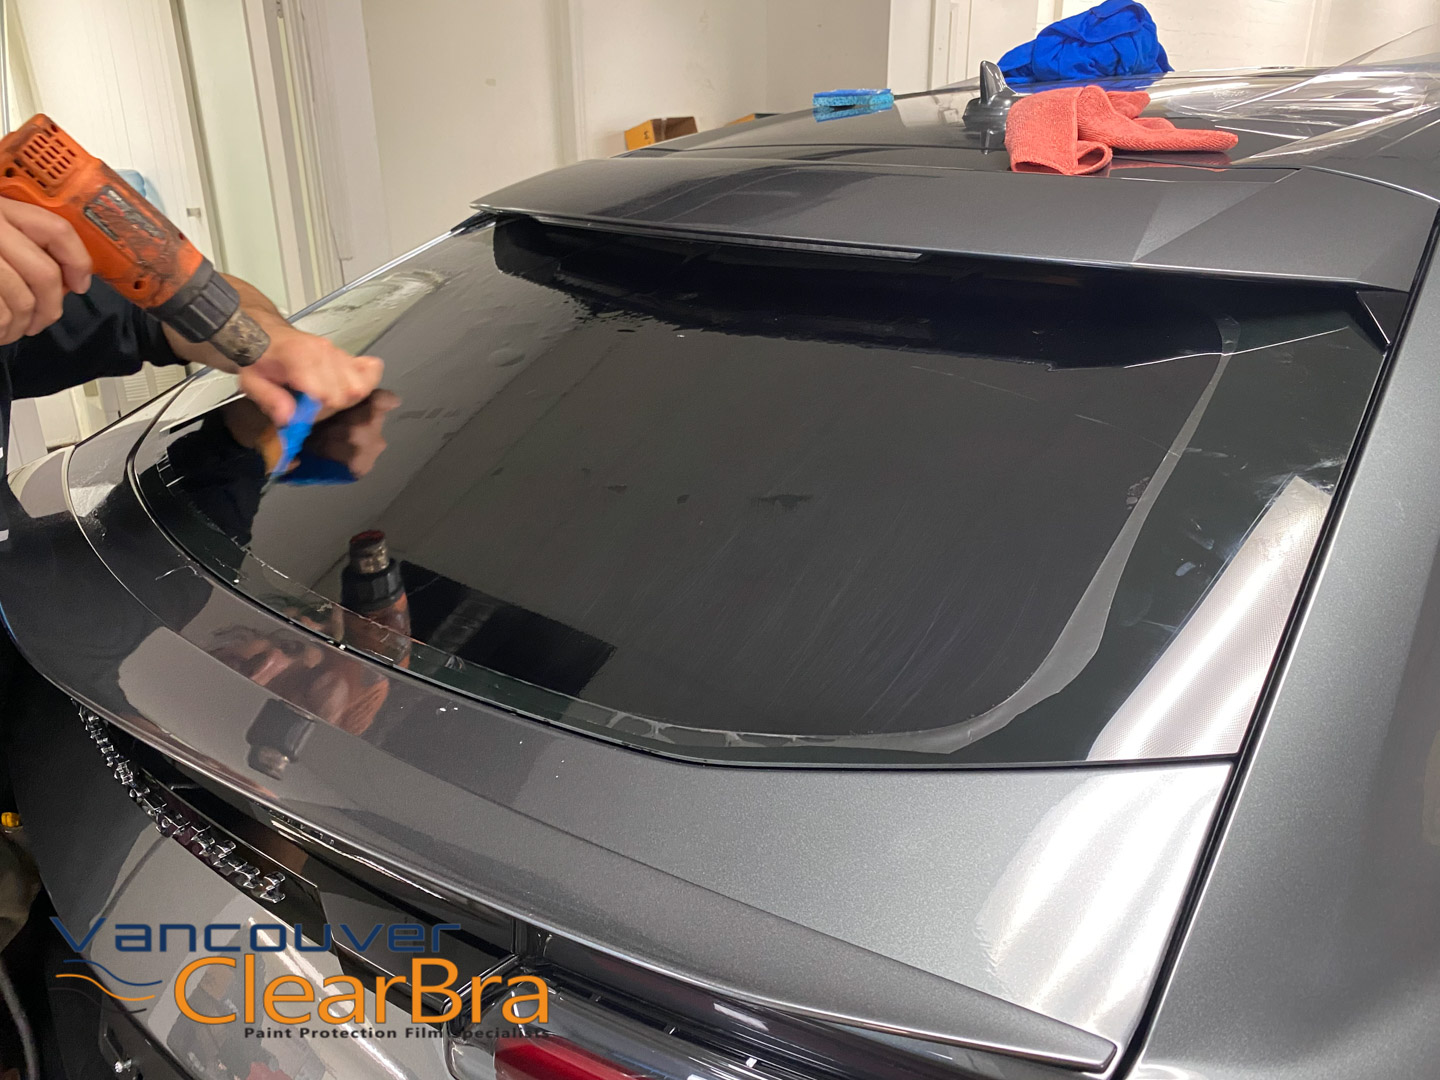 Window Tinting Vancouver - Vancouver ClearBra